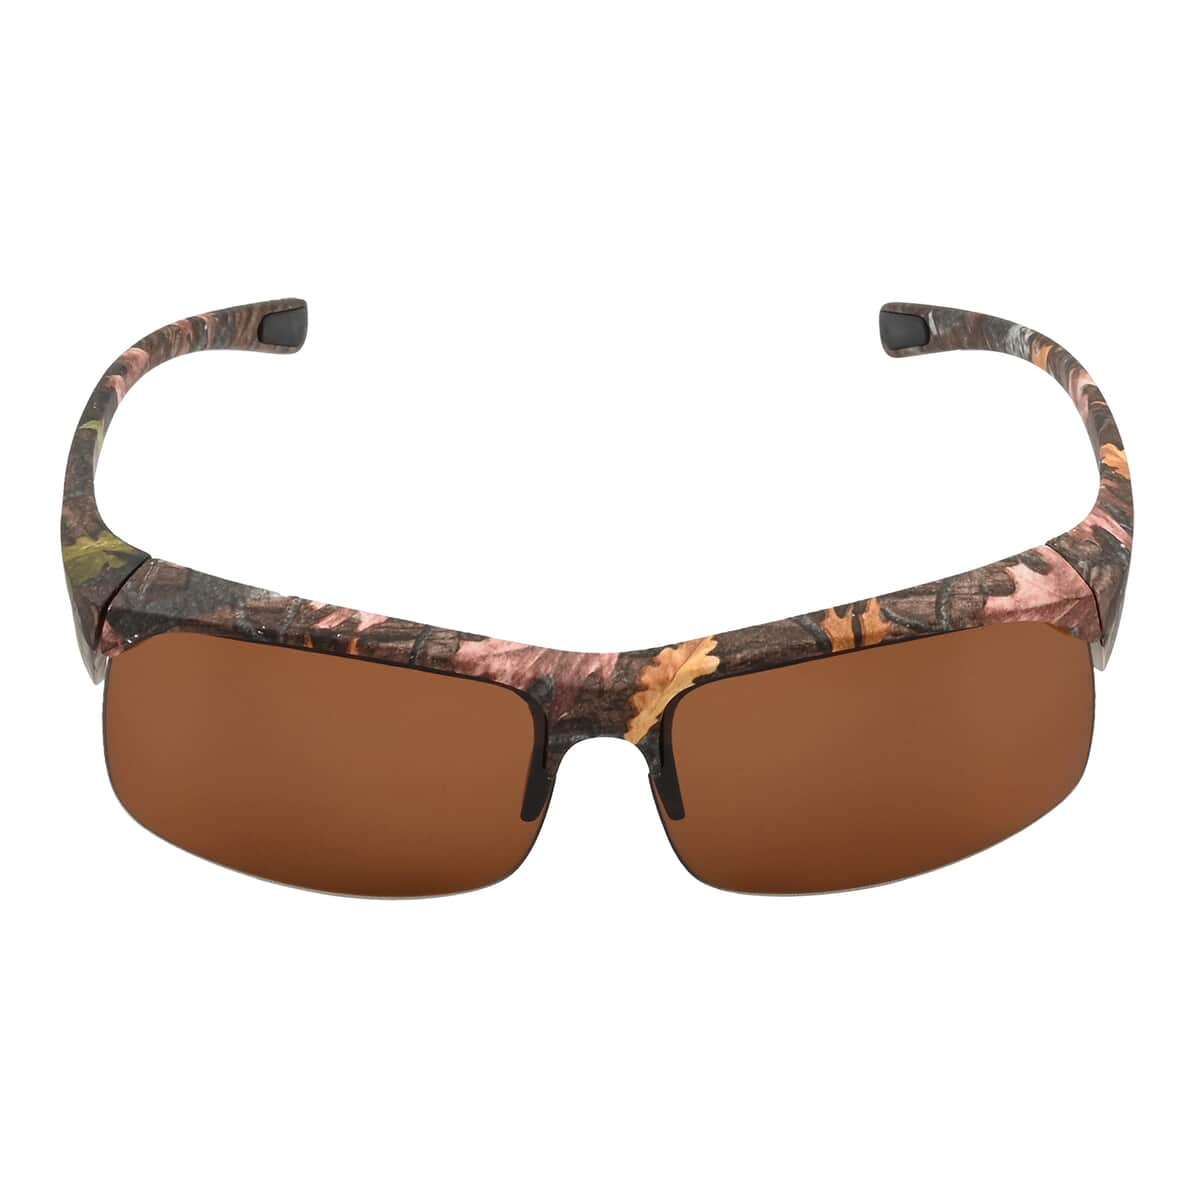 SPX UV 400 Polarized Brown Shaded Sunglasses image number 0